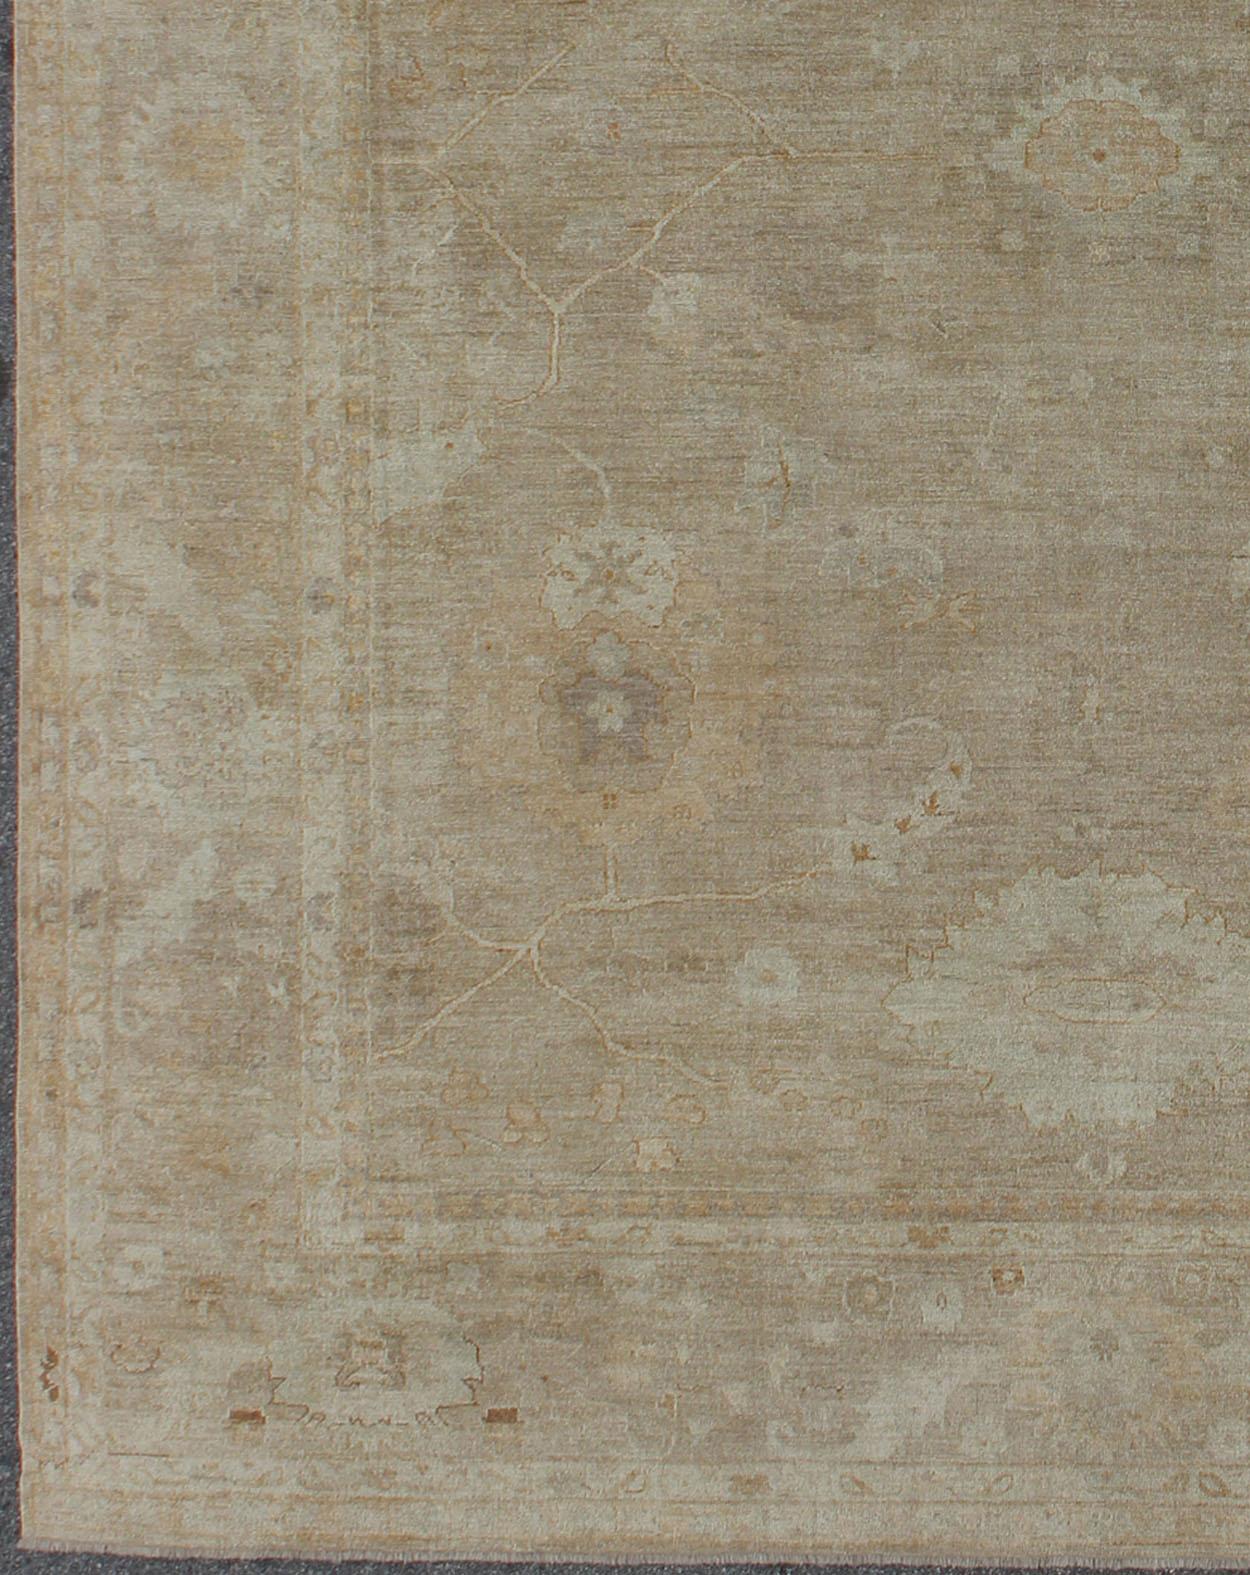 Turkish Very Large Neutral Angora Oushak in Warm Tones of Taupe, Wheat, Tan & Light Blue For Sale